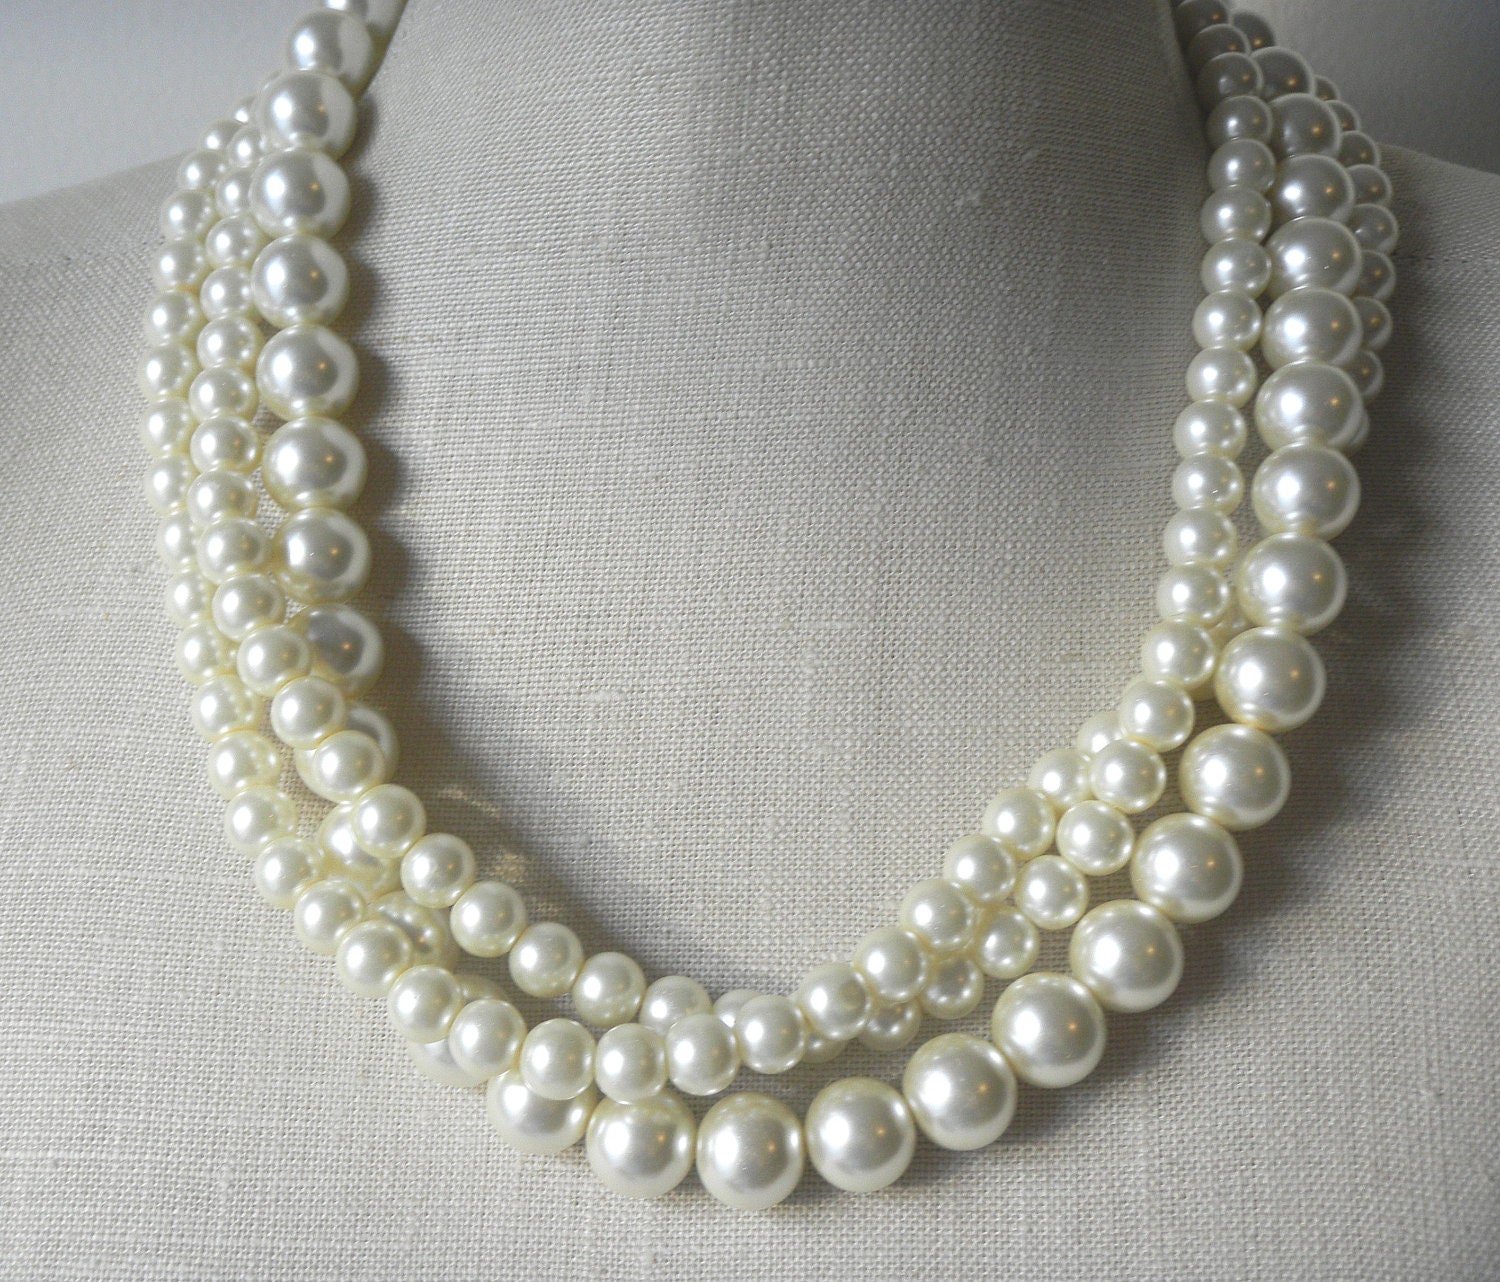 Handmade Triple Strand Twisted Pearl Necklace By Fiorellajewelry 6729